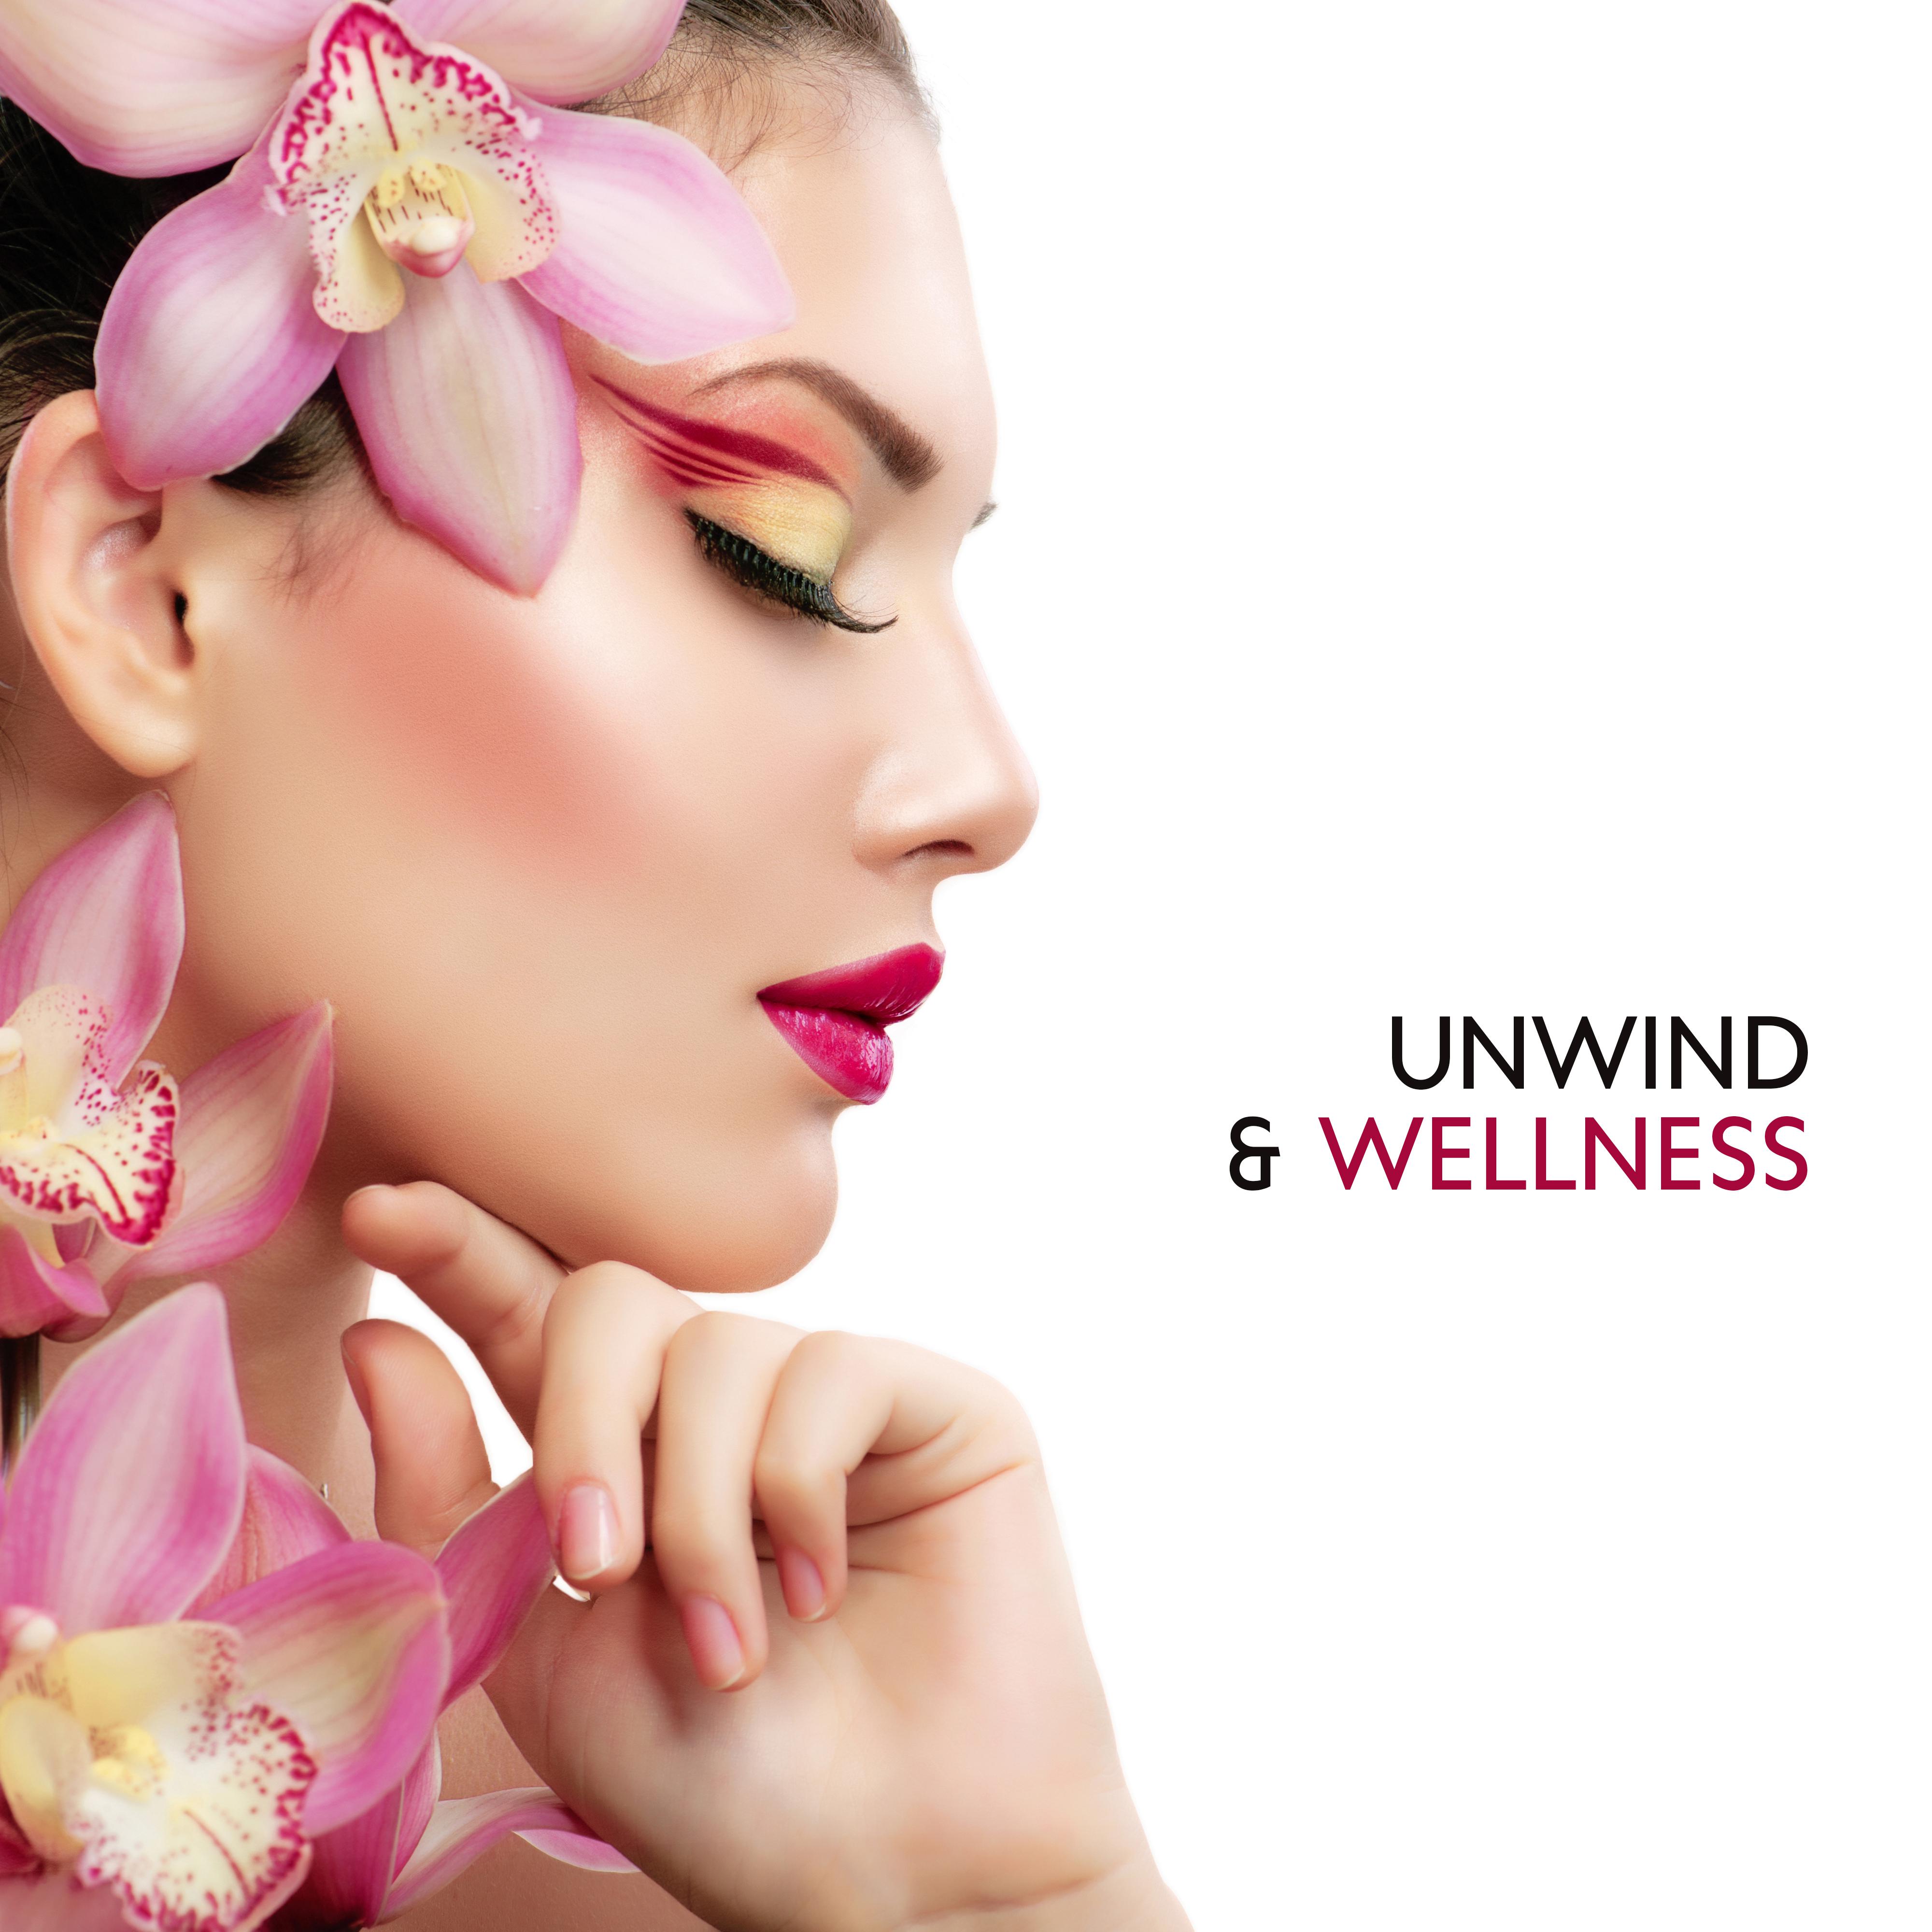 Unwind & Wellness - Music for Spa, Massage, Relaxation and Beauty Treatments